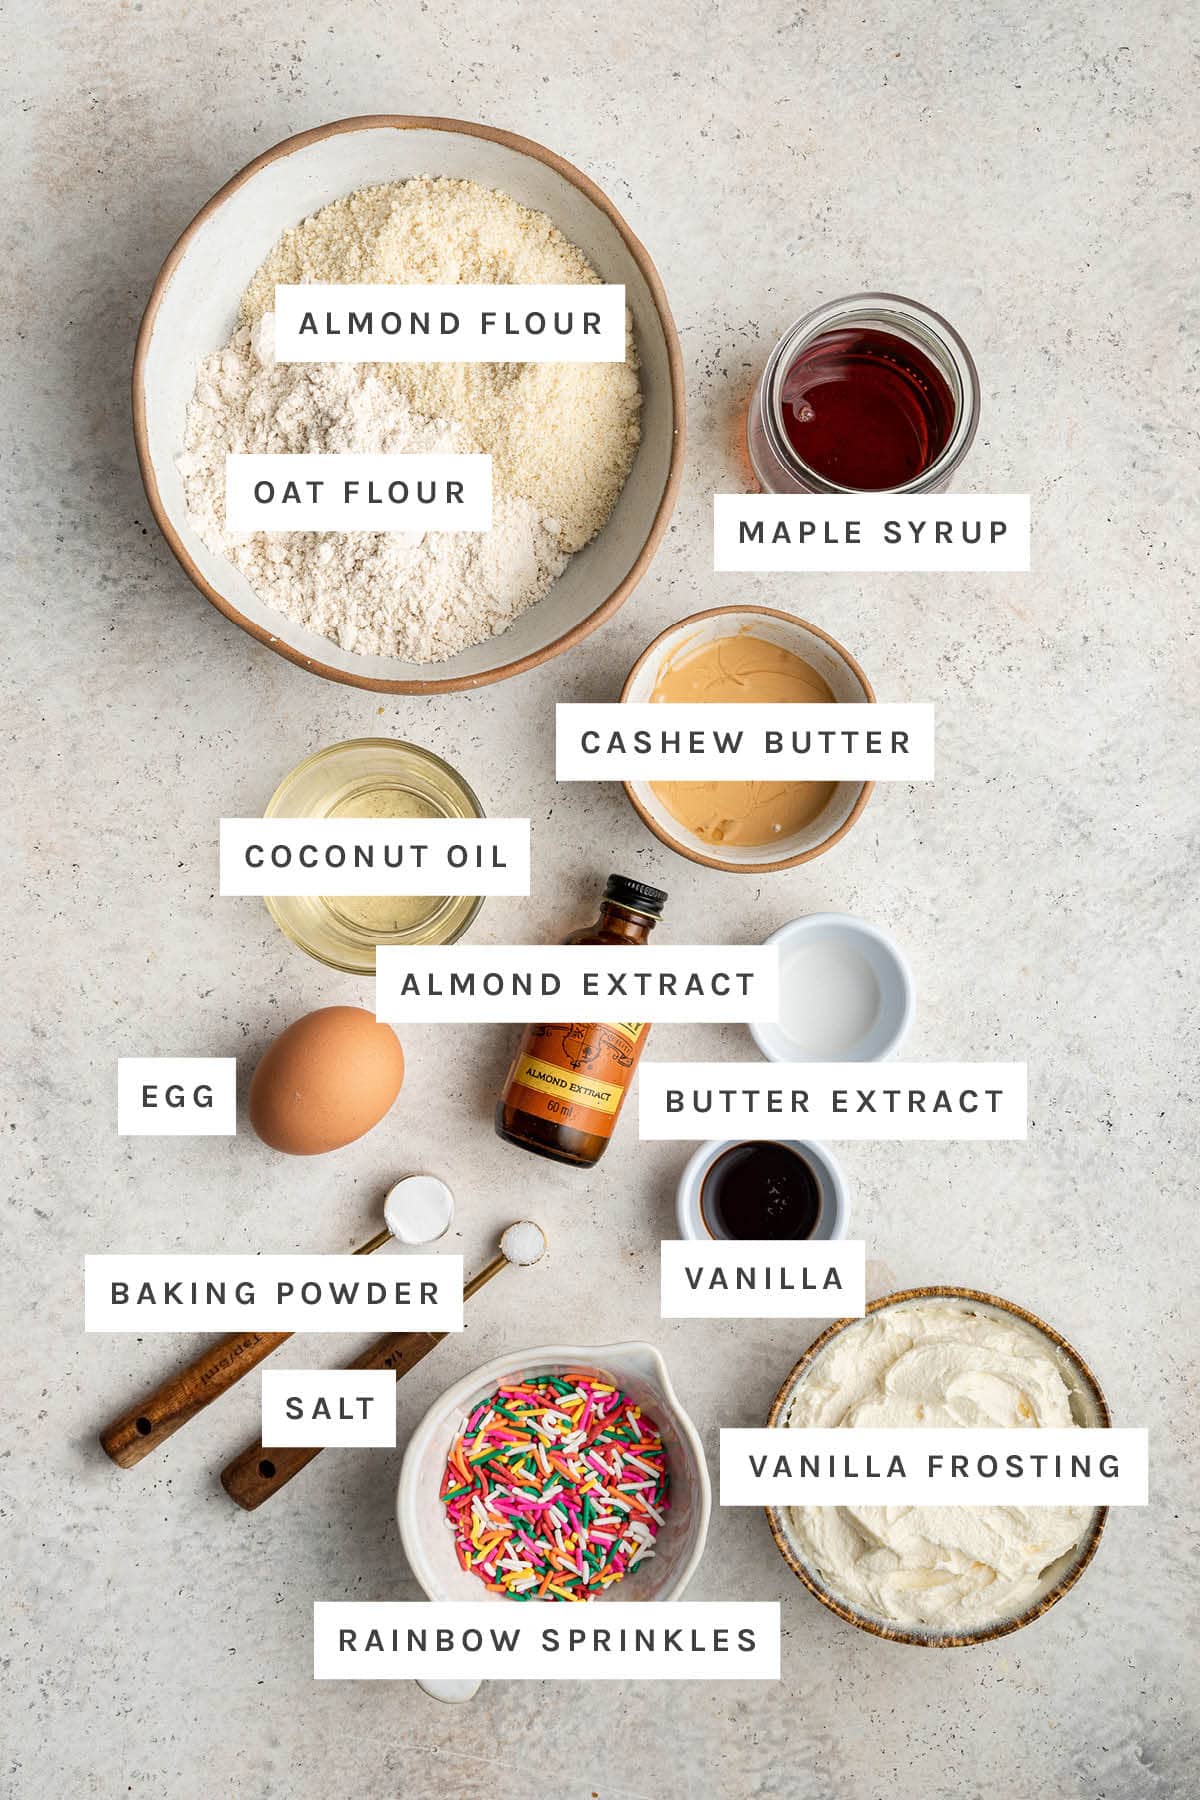 Ingredients measured out to make Birthday Cake Cookies: almond flour, oat flour, maple syrup, cashew butter, coconut oil, almond extract, butter extract, egg, baking powder, salt, vanilla, vanilla frosting and rainbow sprinkles.